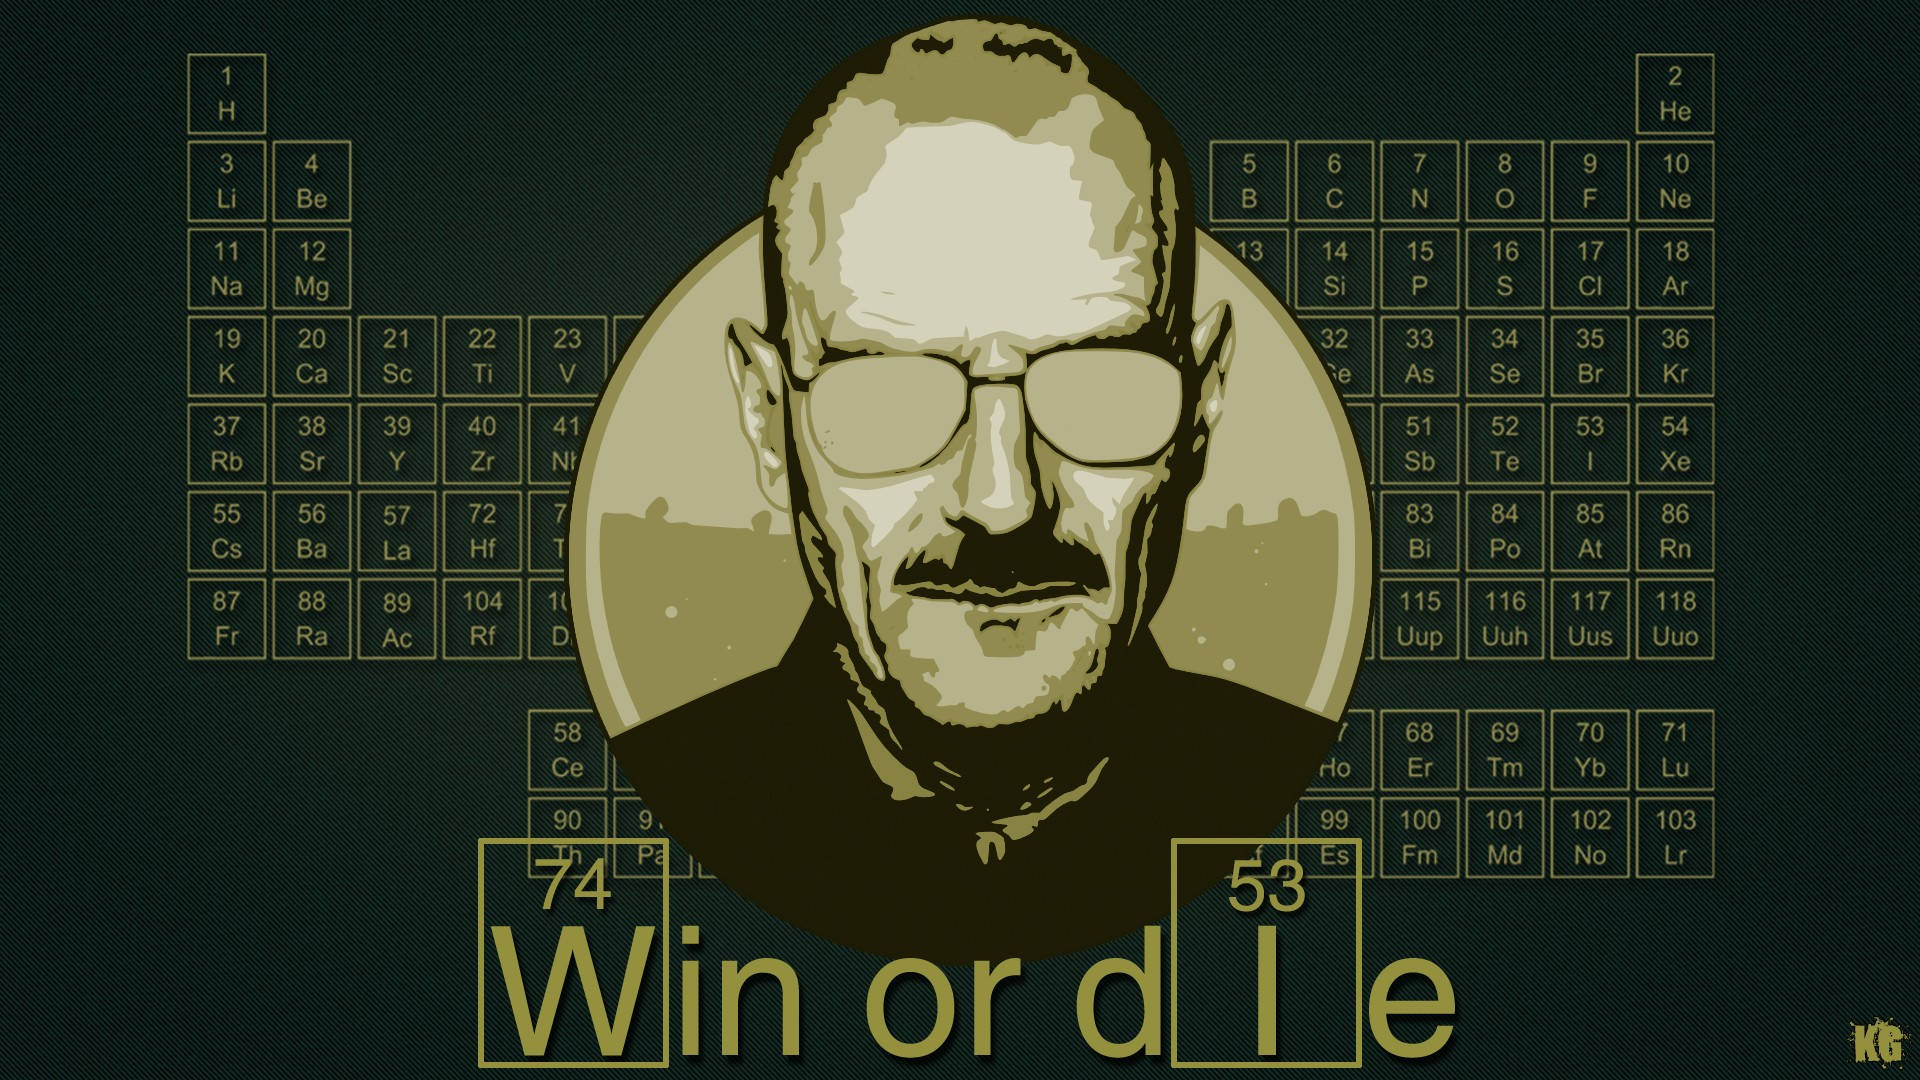 Breaking Bad Periodic Table Elements